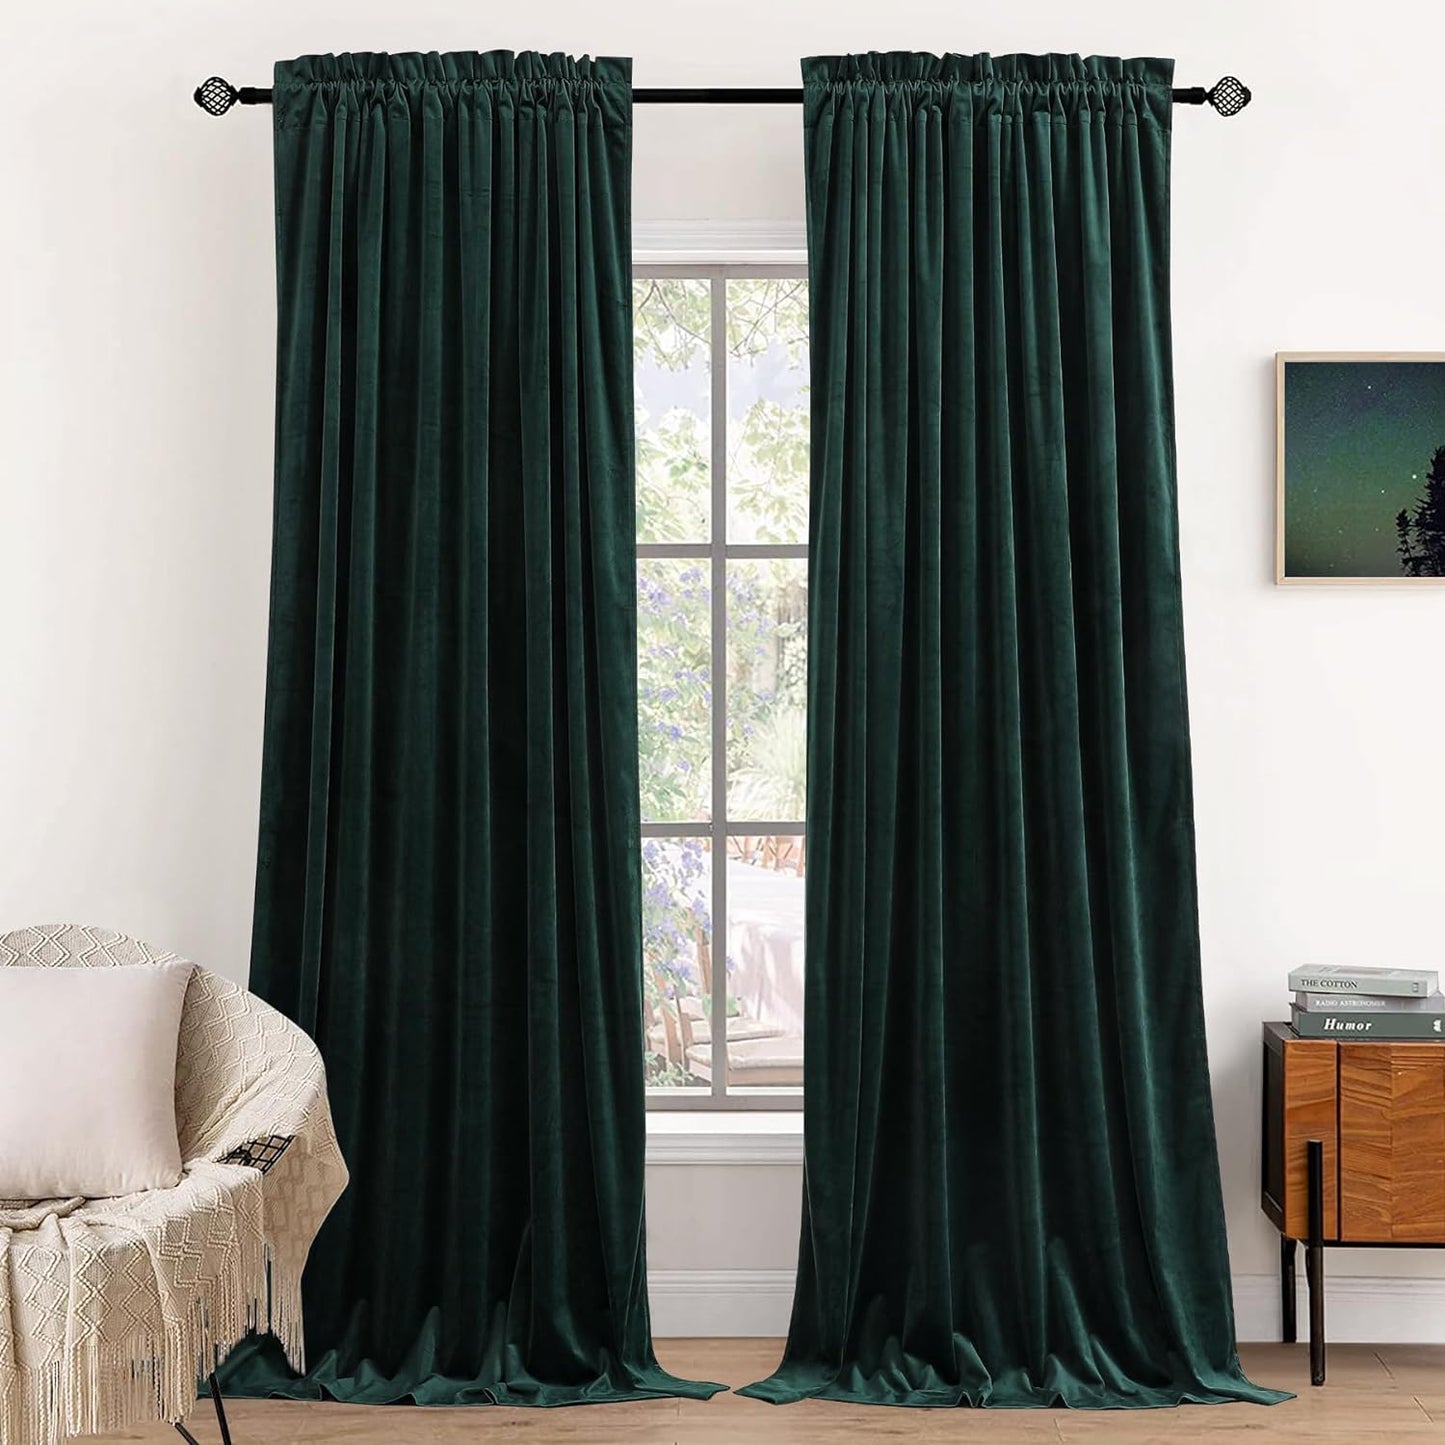 Dchola Olive Green Velvet Curtains for Bedroom Window, Super Soft Vintage Luxury Heavy Drapes, Room Darkening Rod Pocket Curtain for Living Room, W52 by L84 Inches, 2 Panels  Dchola Dark Green W52*L63 